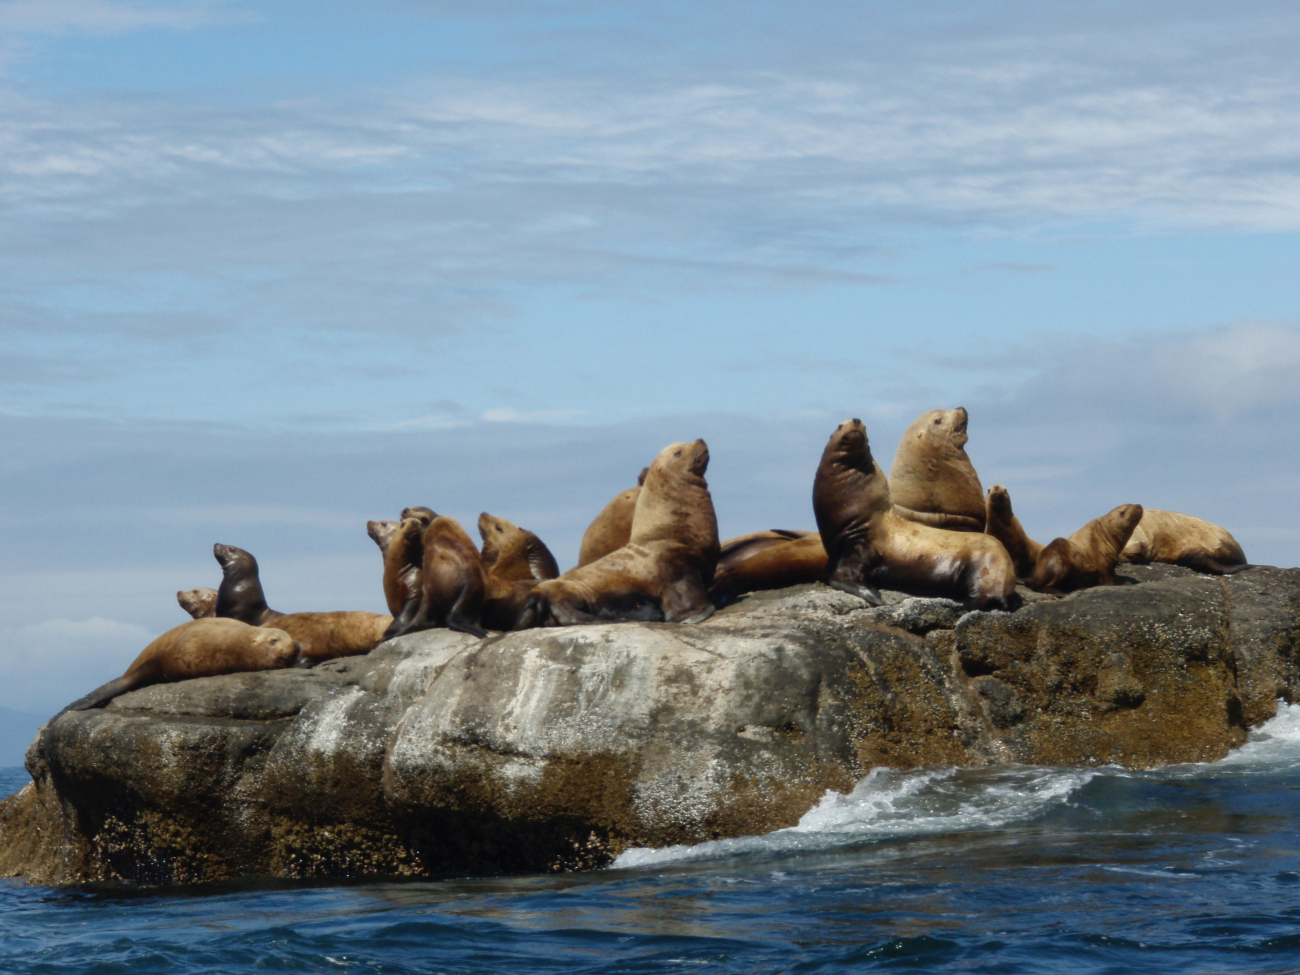 Sea lions at nearly high tide on an offshore rock